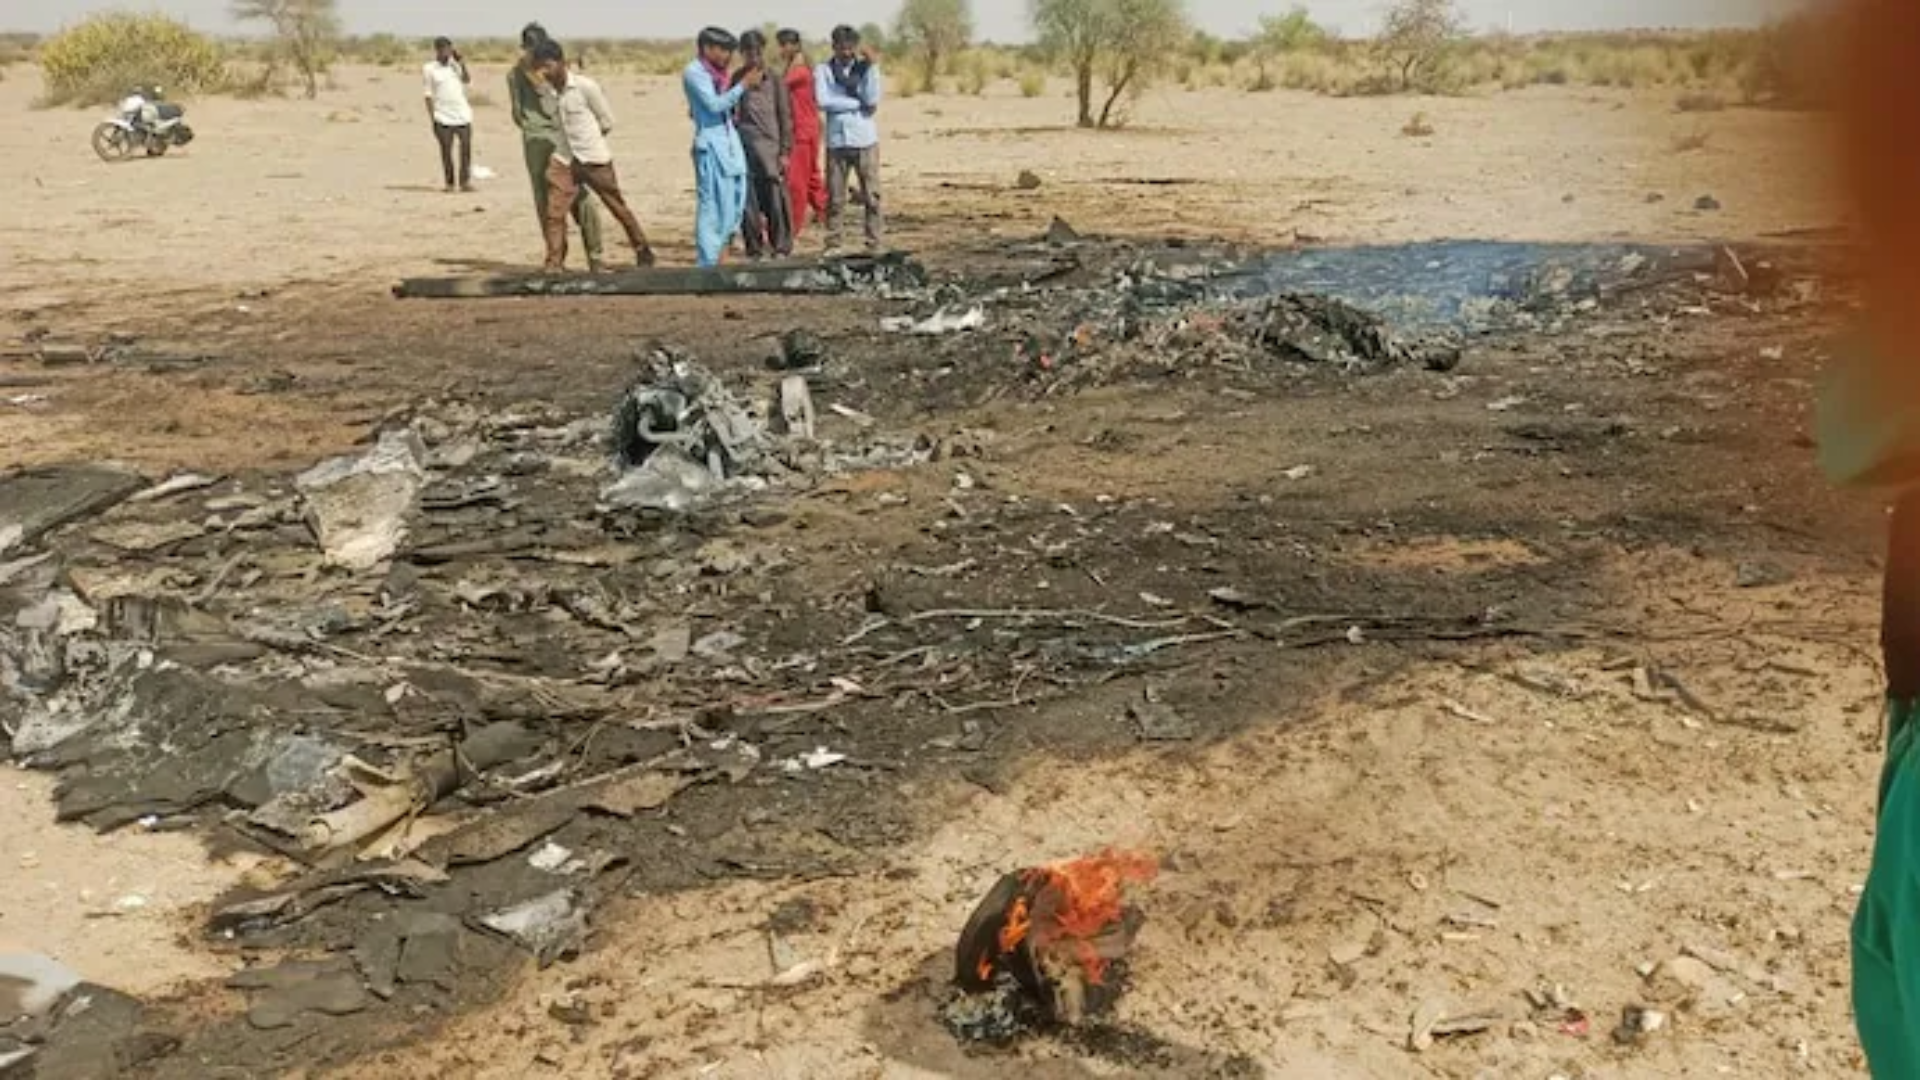 Indian Air Force Remotely Piloted Aircraft Crashes During Training Sortie in Jaisalmer